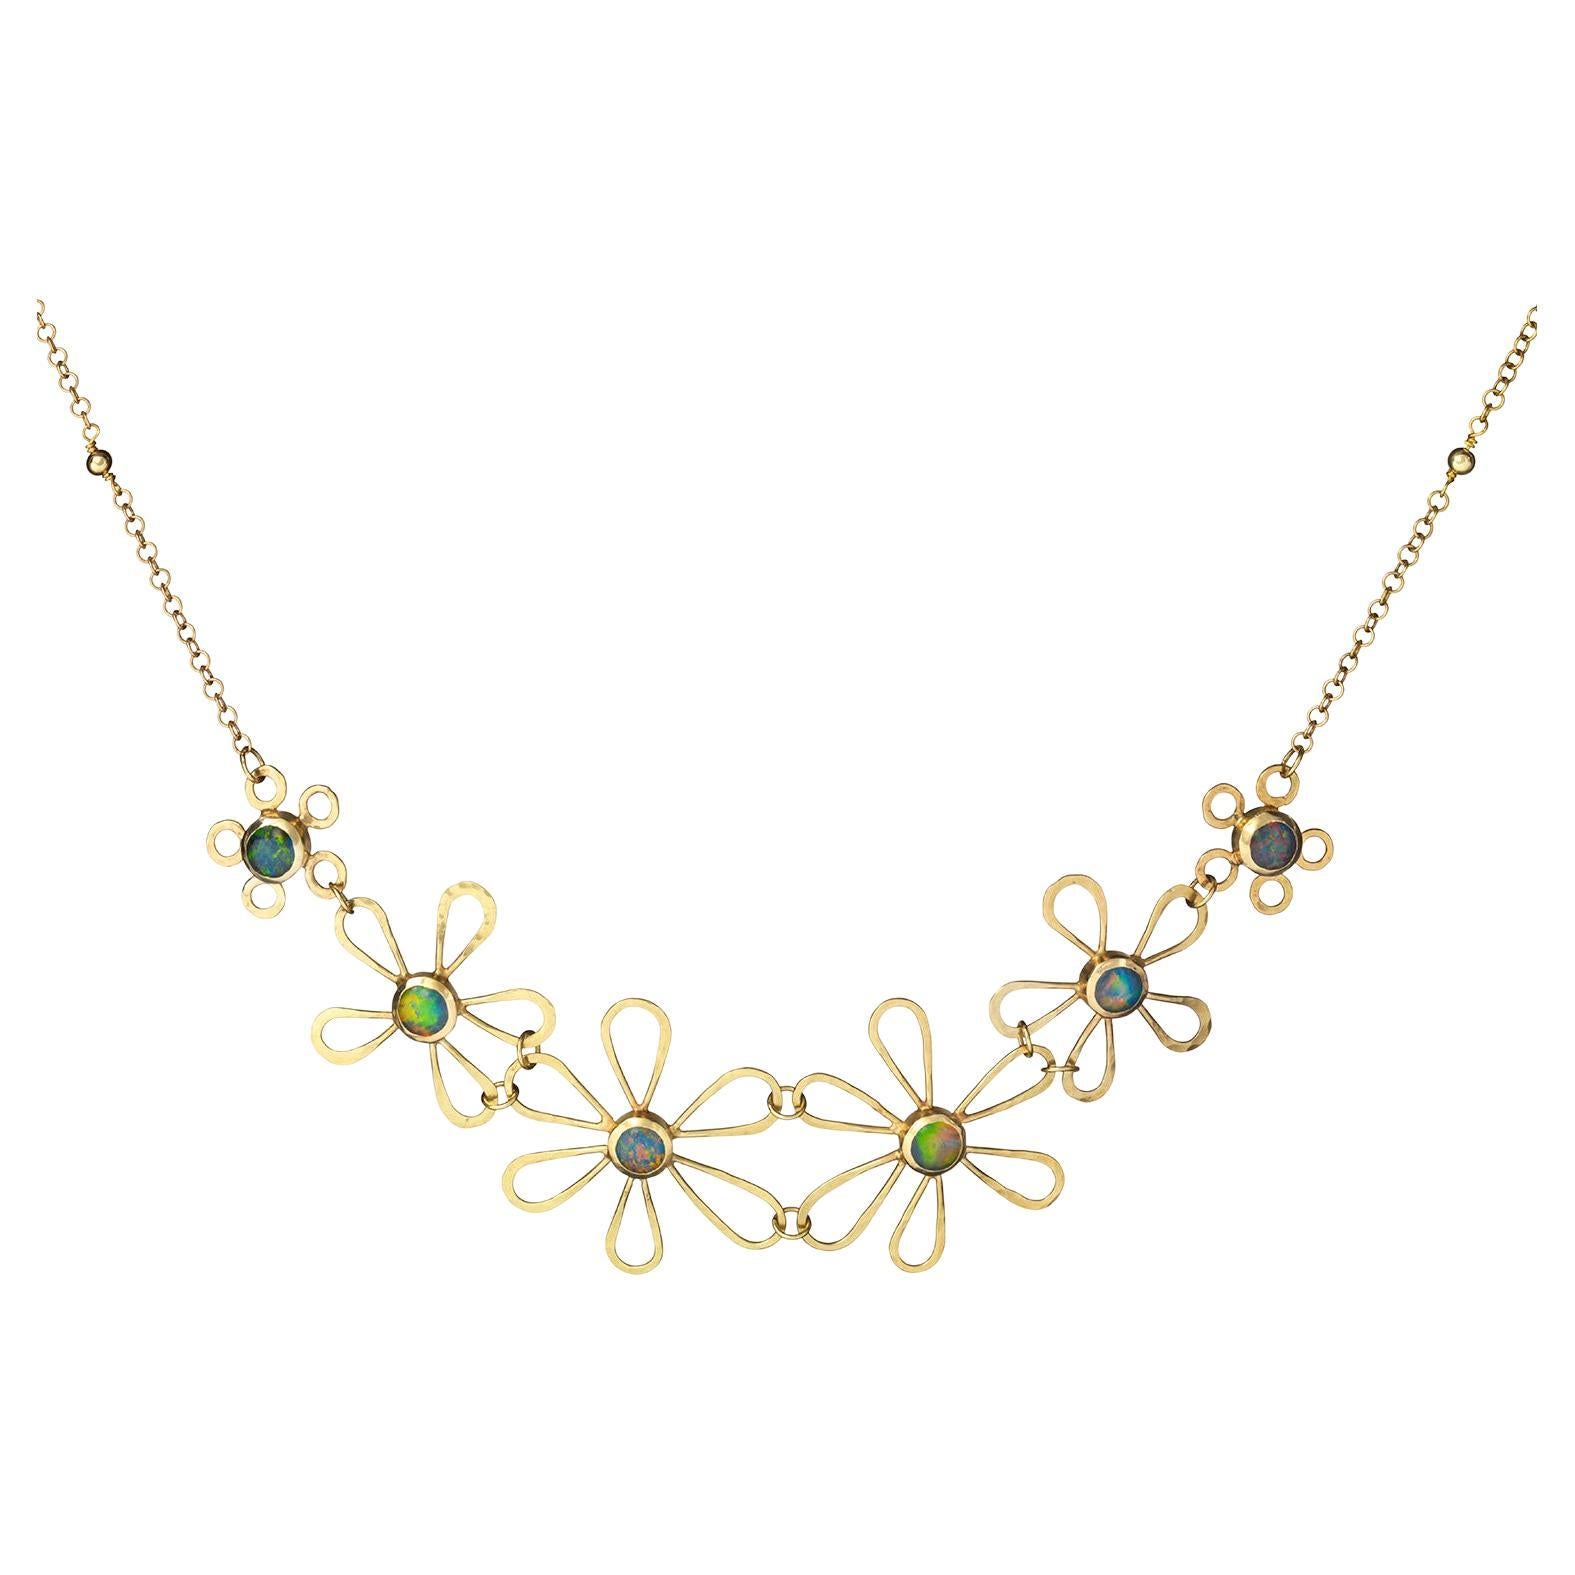 14k Gold One-of-a-kind Daisy Chain Necklace with Opals For Sale